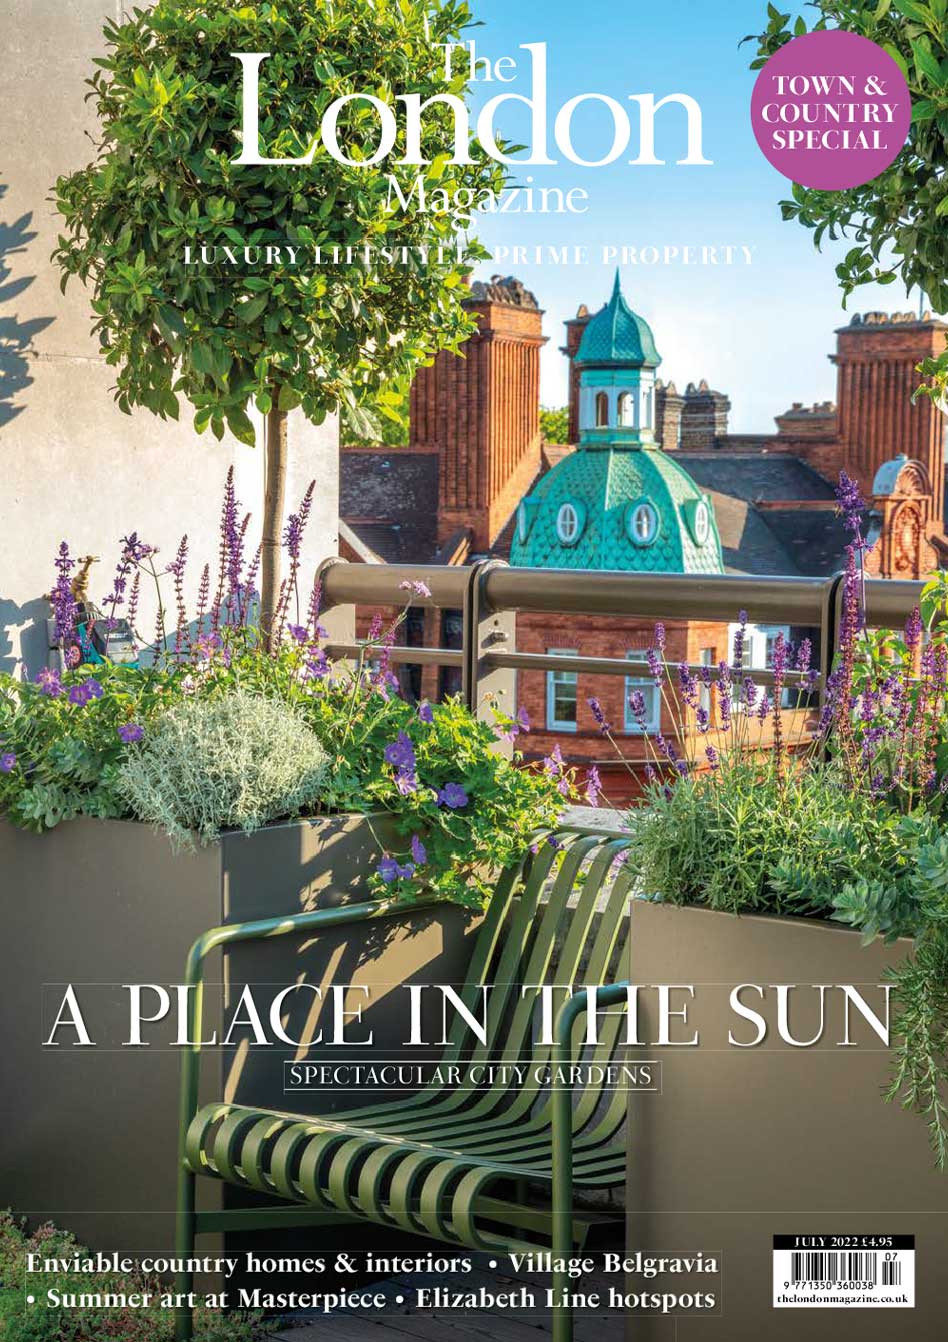 The London Magazine cover featuring Mayfair Roof Terrace